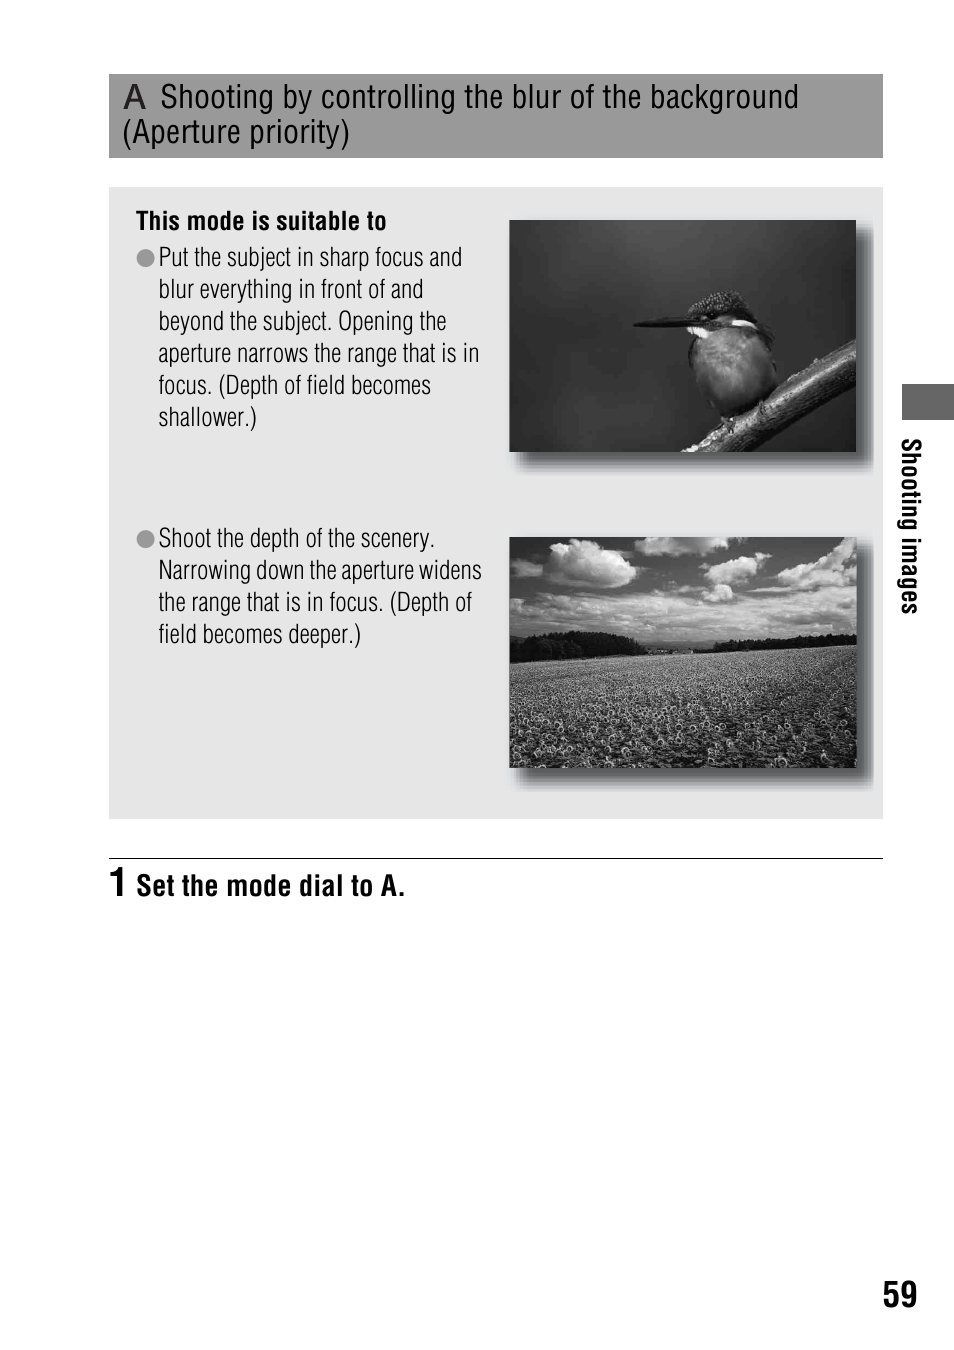 Shooting by controlling the blur of the background, Aperture priority) | Sony DSLR-A350 User Manual | Page 59 / 167